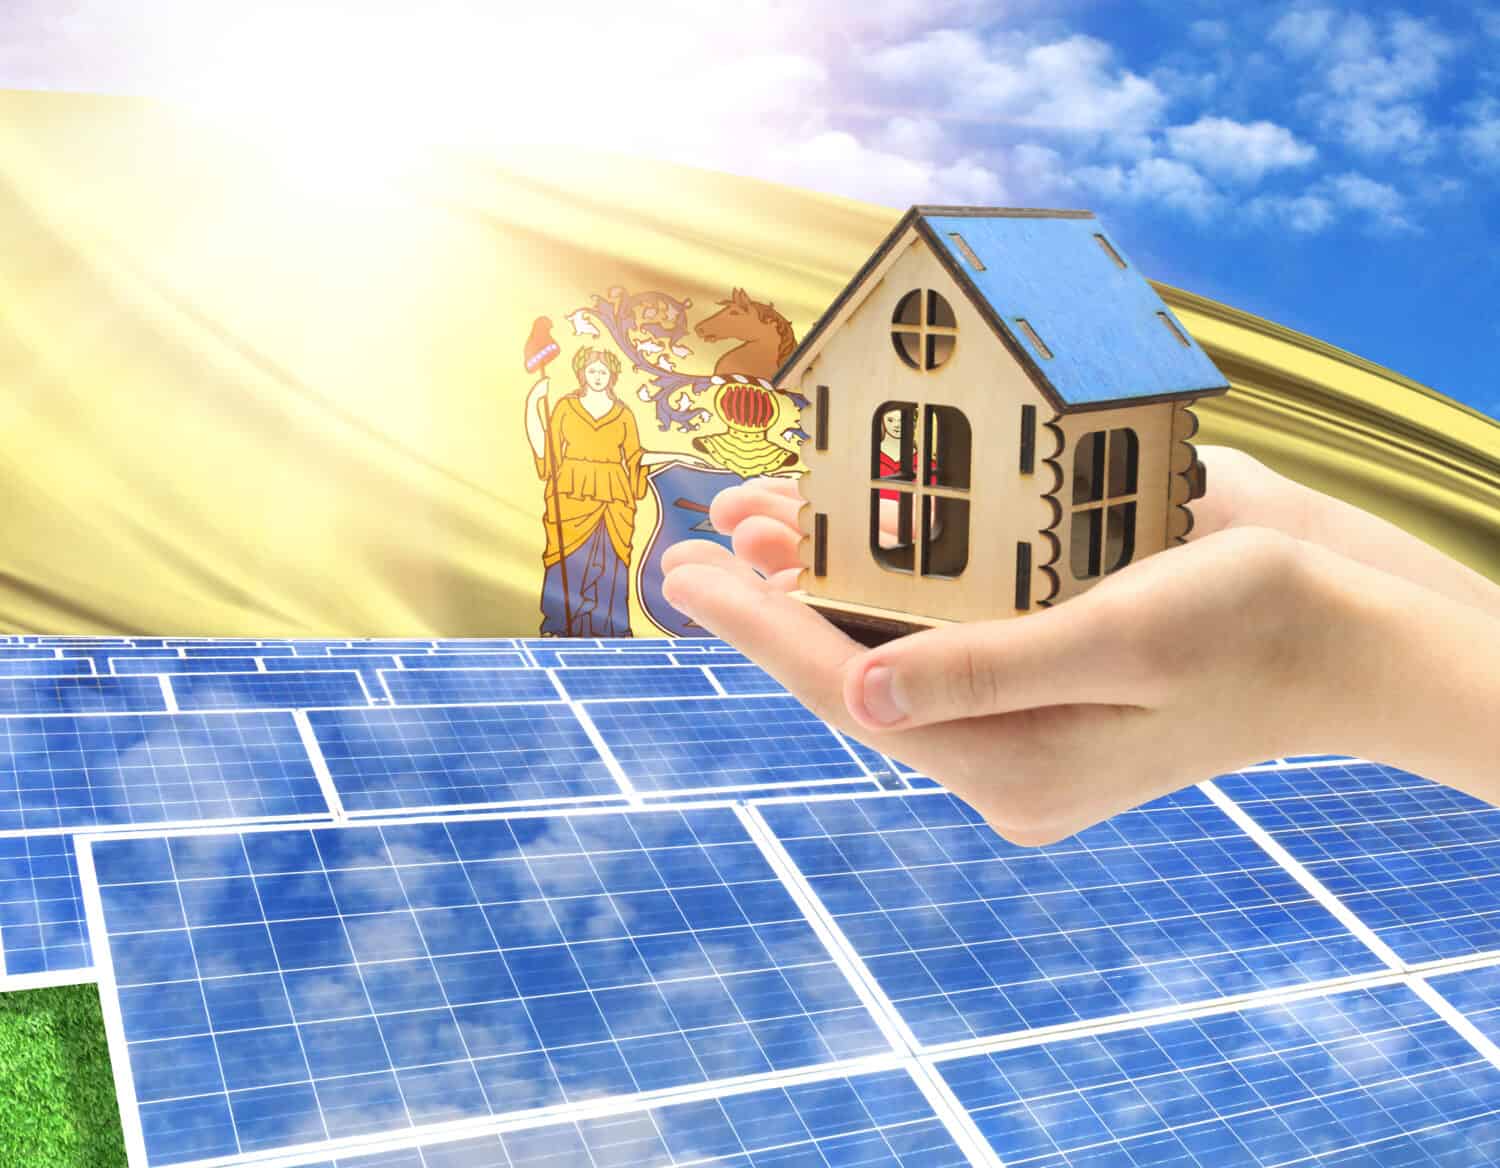 The photo with solar panels and a woman's palm holding a toy house shows the flag State of New Jersey in the sun.